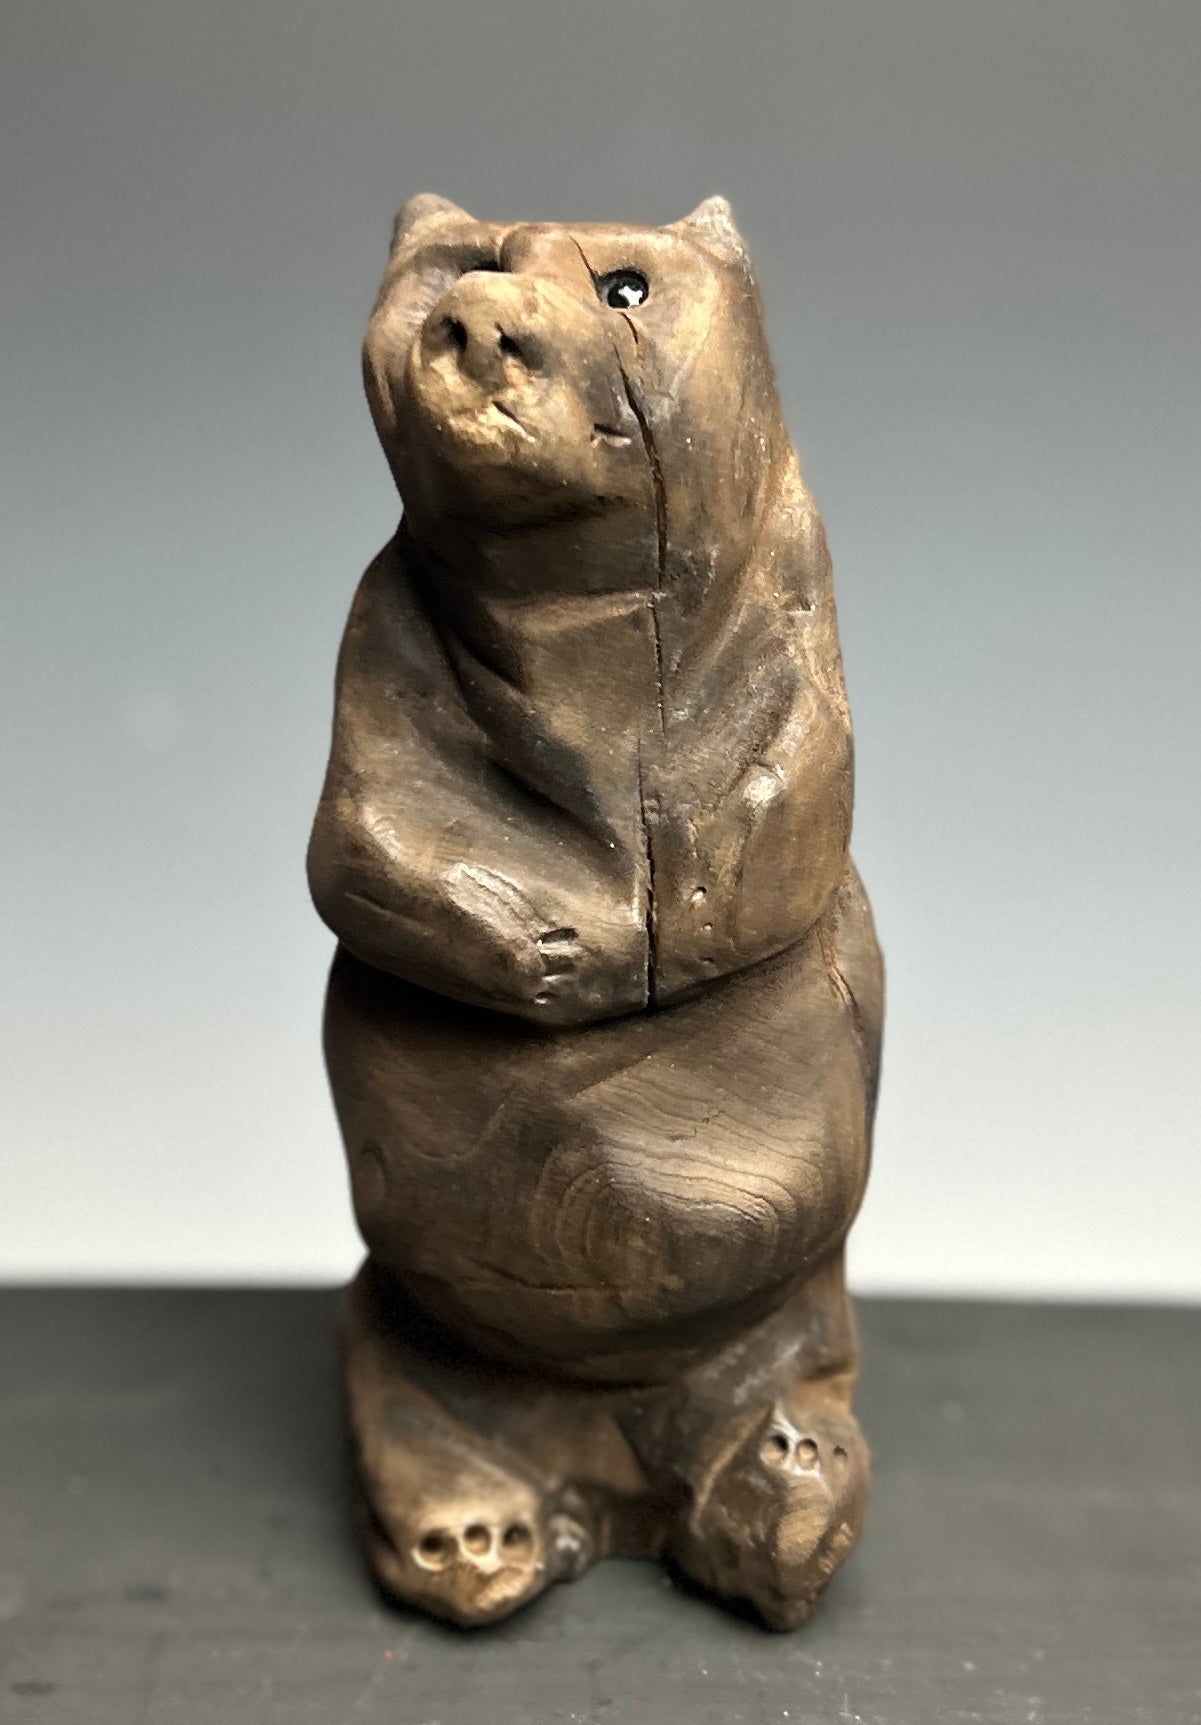 "CHERRY BEAR" HAND CARVED WOOD SCULPTURE